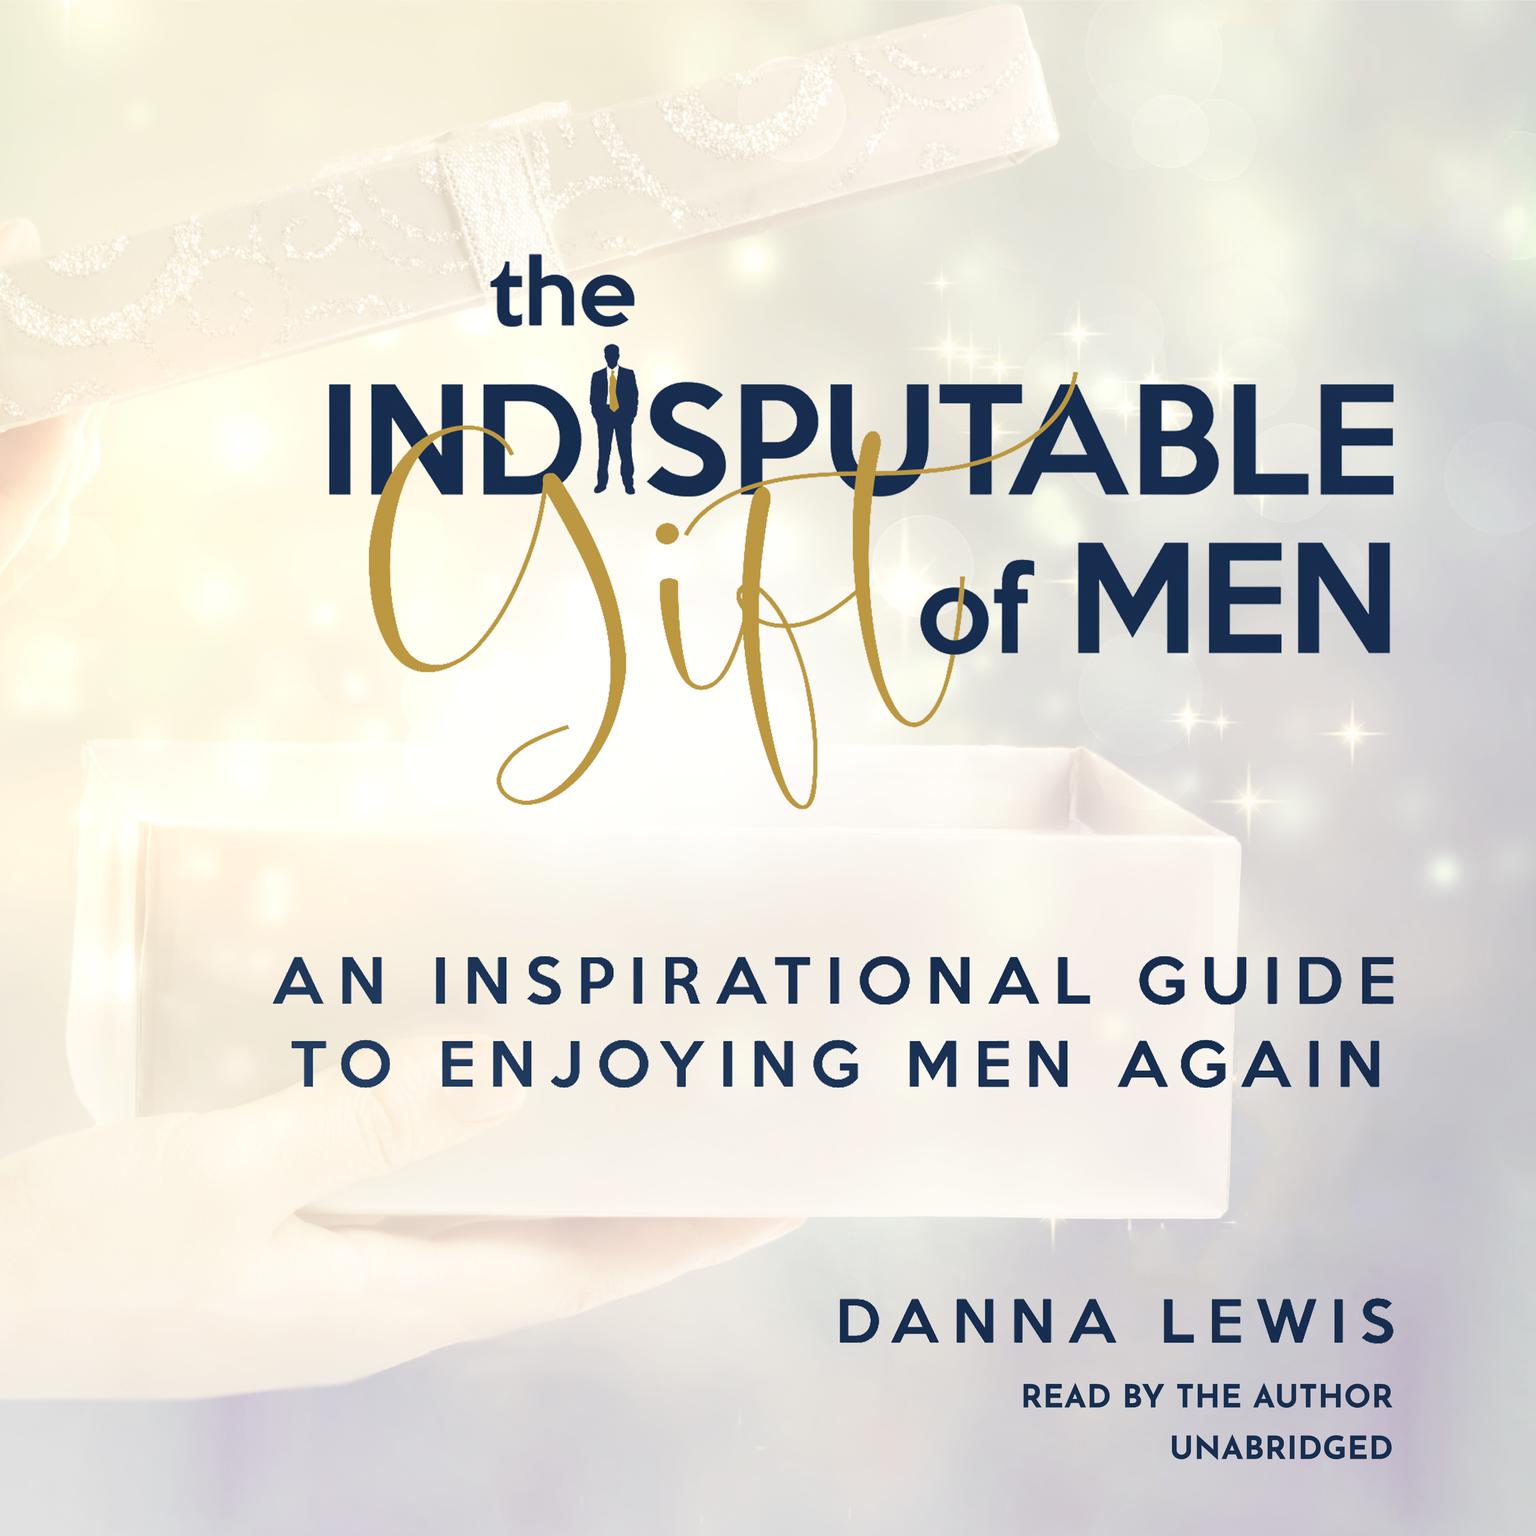 The Indisputable Gift of Men: An Inspirational Guide to Enjoying Men Again Audiobook, by Danna Lewis